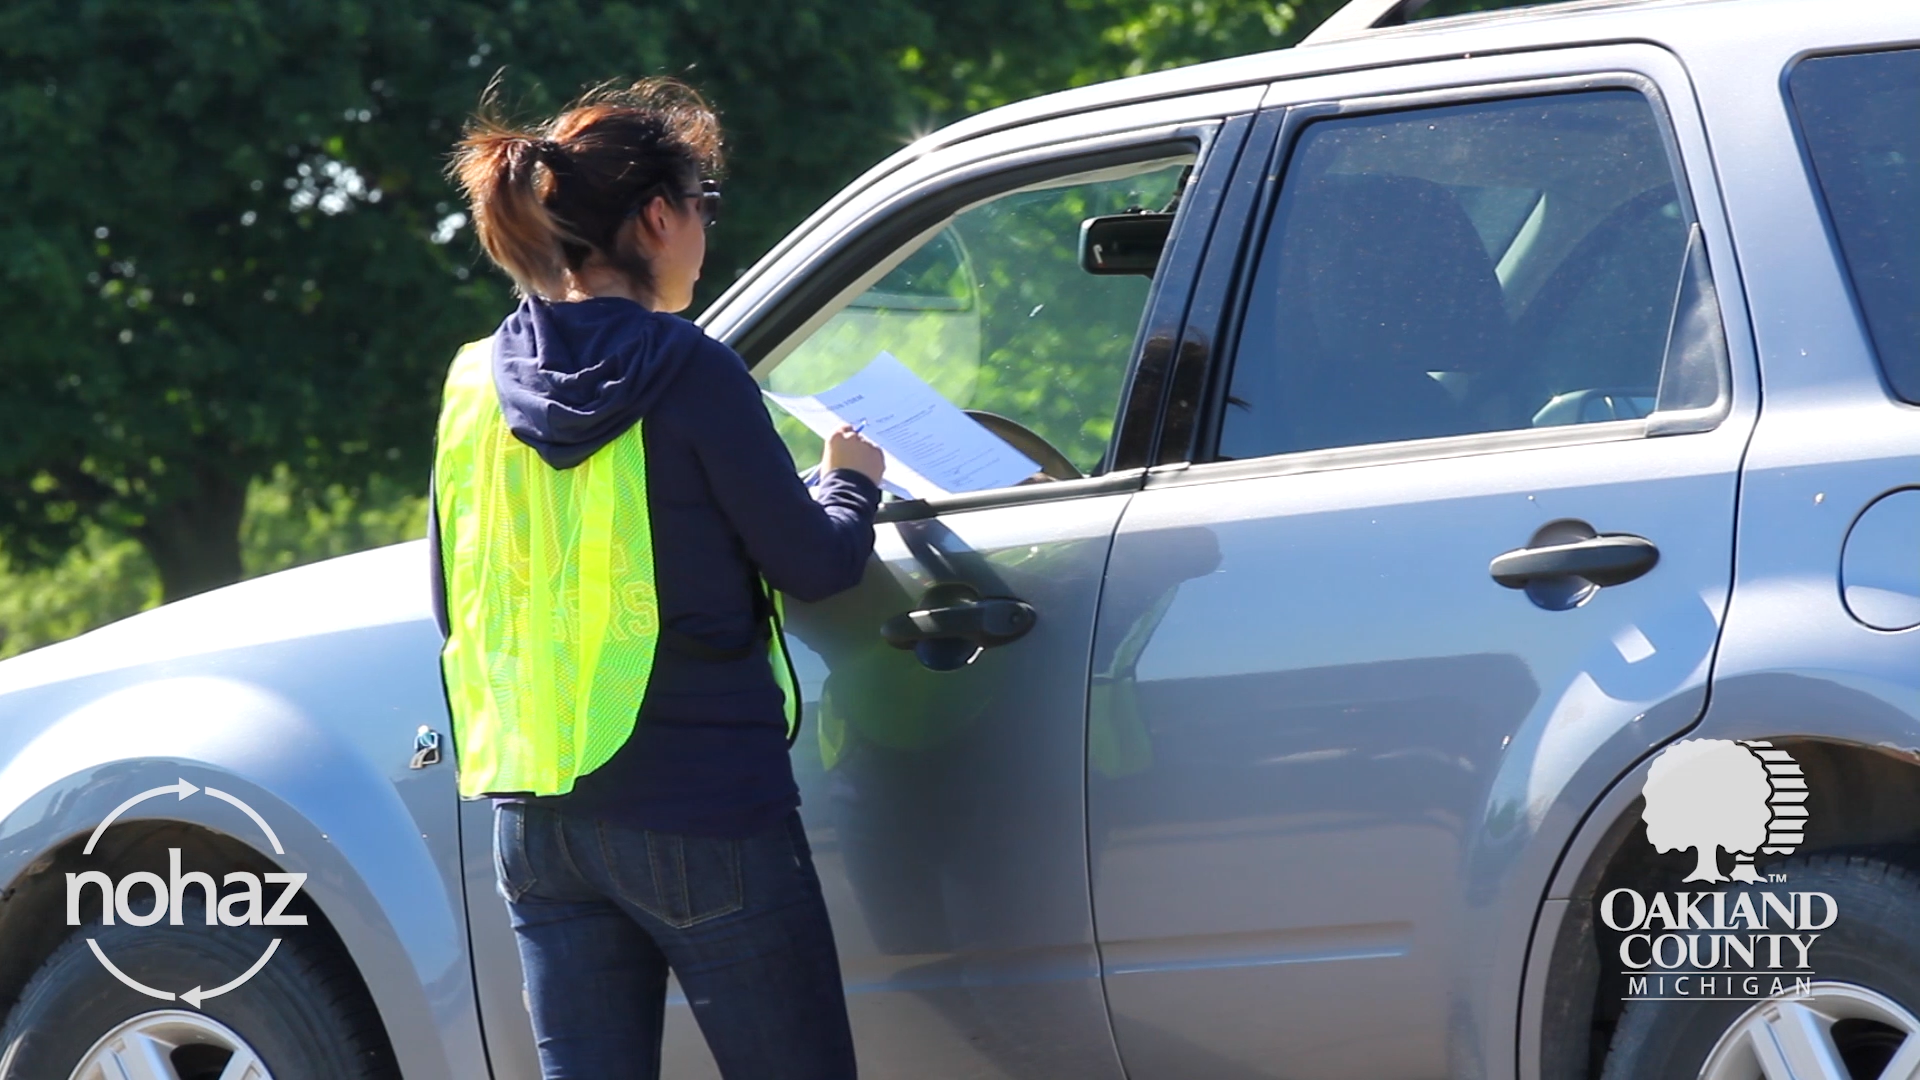 Woman wearing safety vest talking to person through car window at NoHaz event